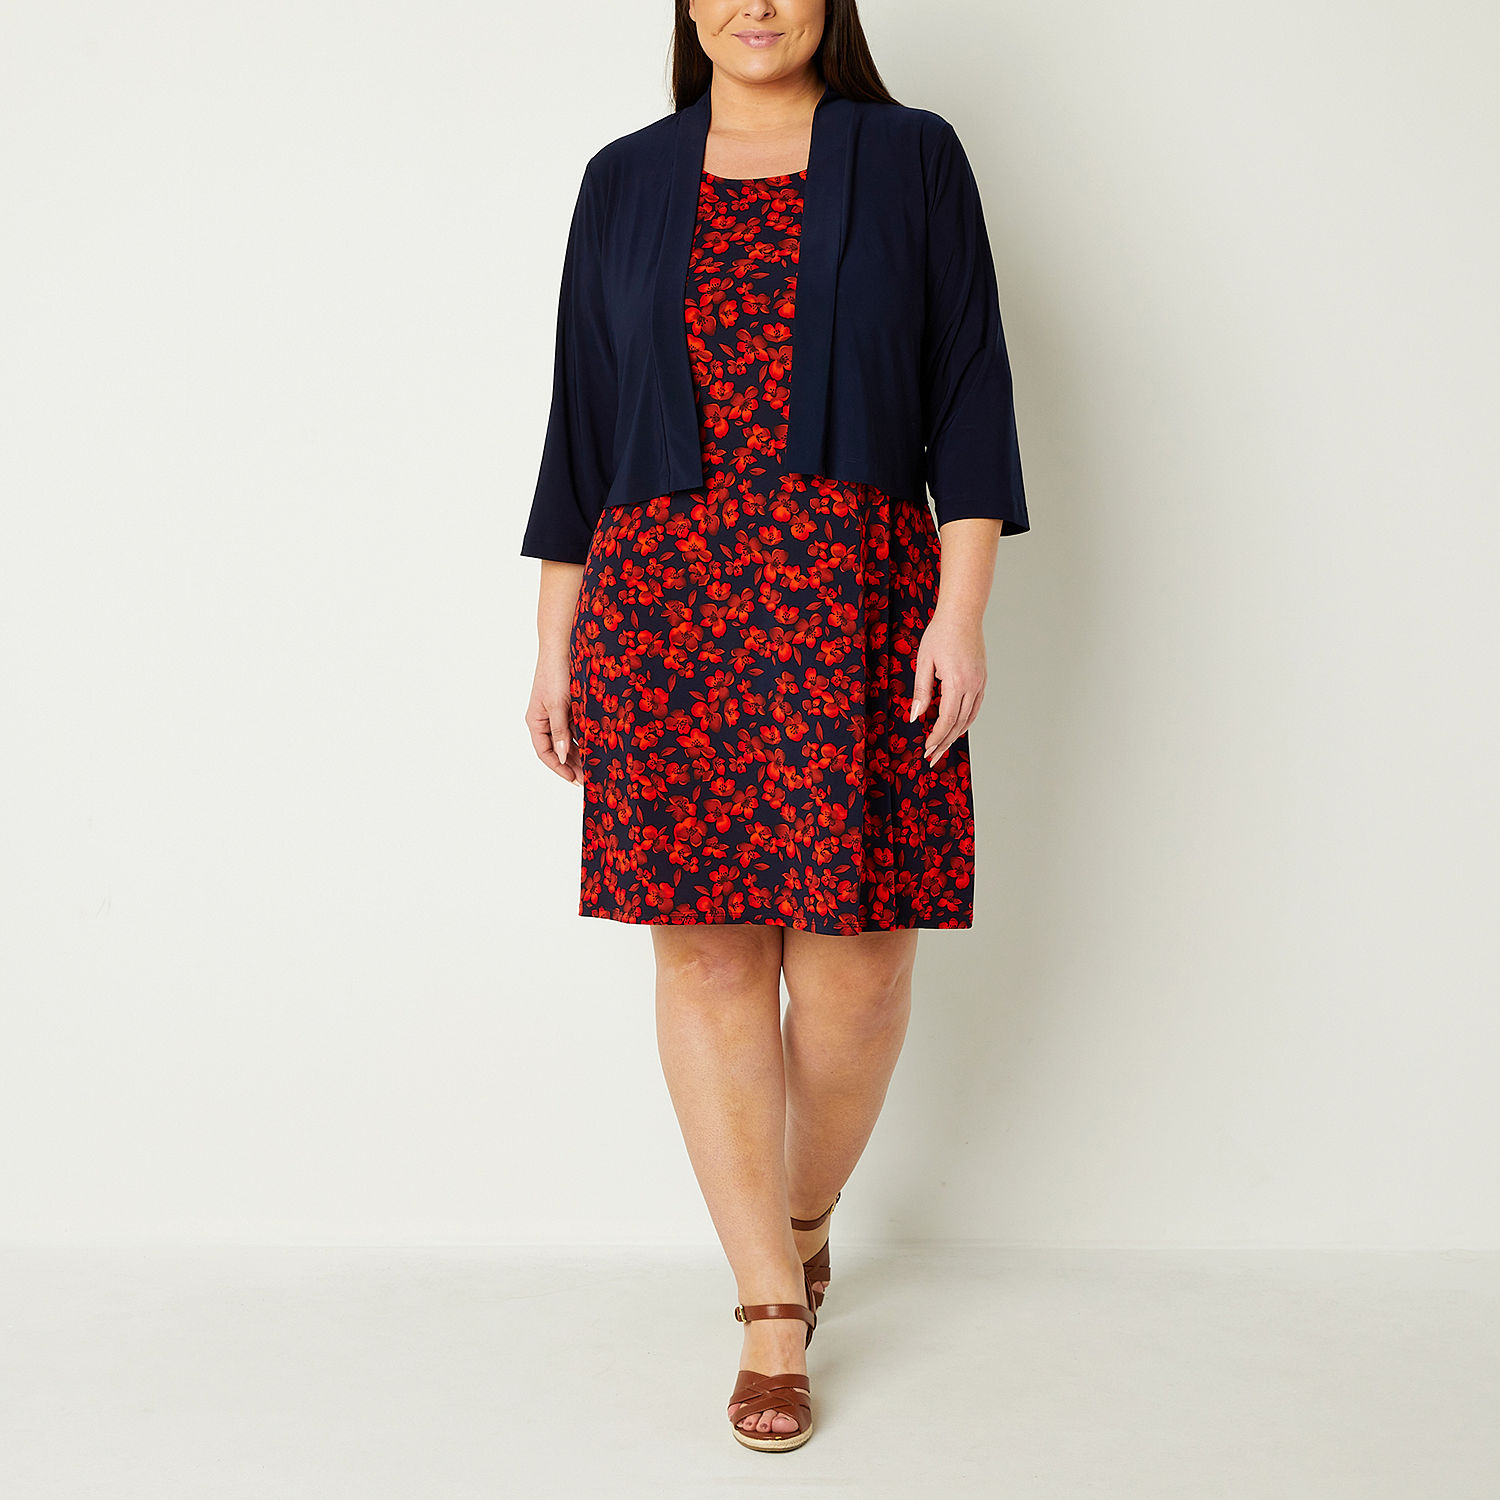 Perceptions Plus Jacket Dress, Color: Navy Red - JCPenney